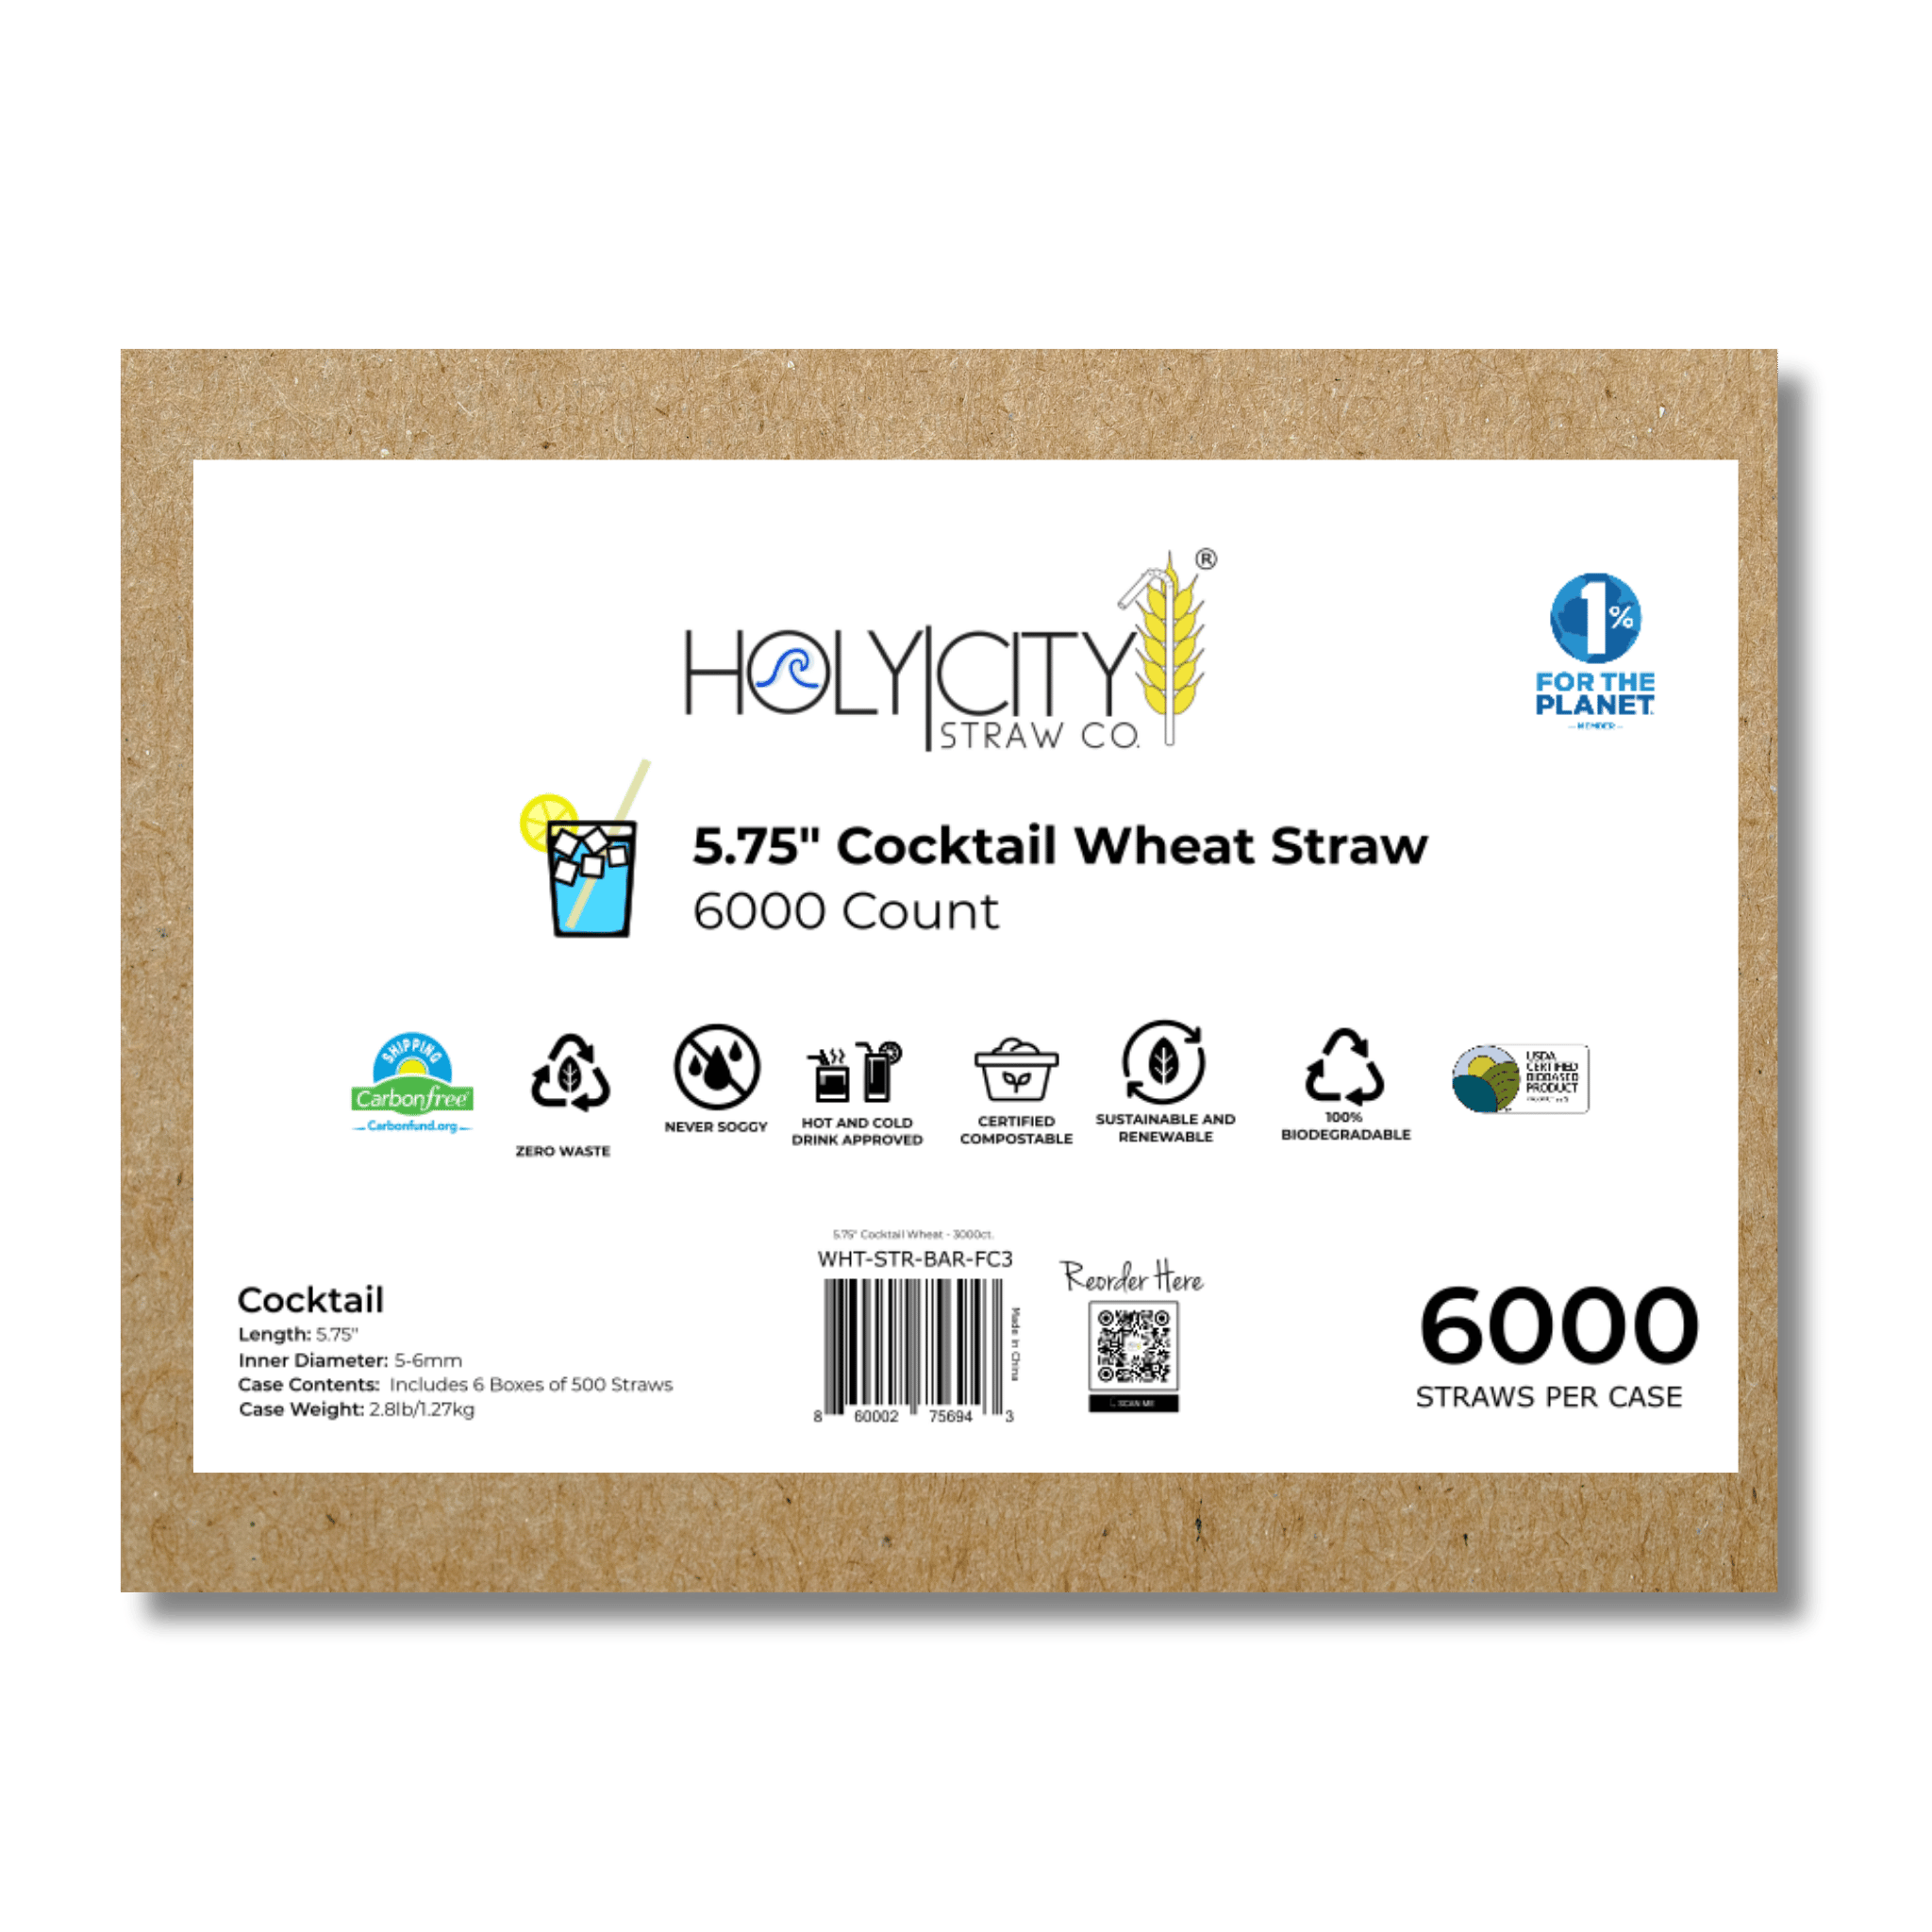 HolyCityStrawCompany 5.75-inch Wheat Cocktail Straws box of 6000 straws showing eco-friendly certifications and product details